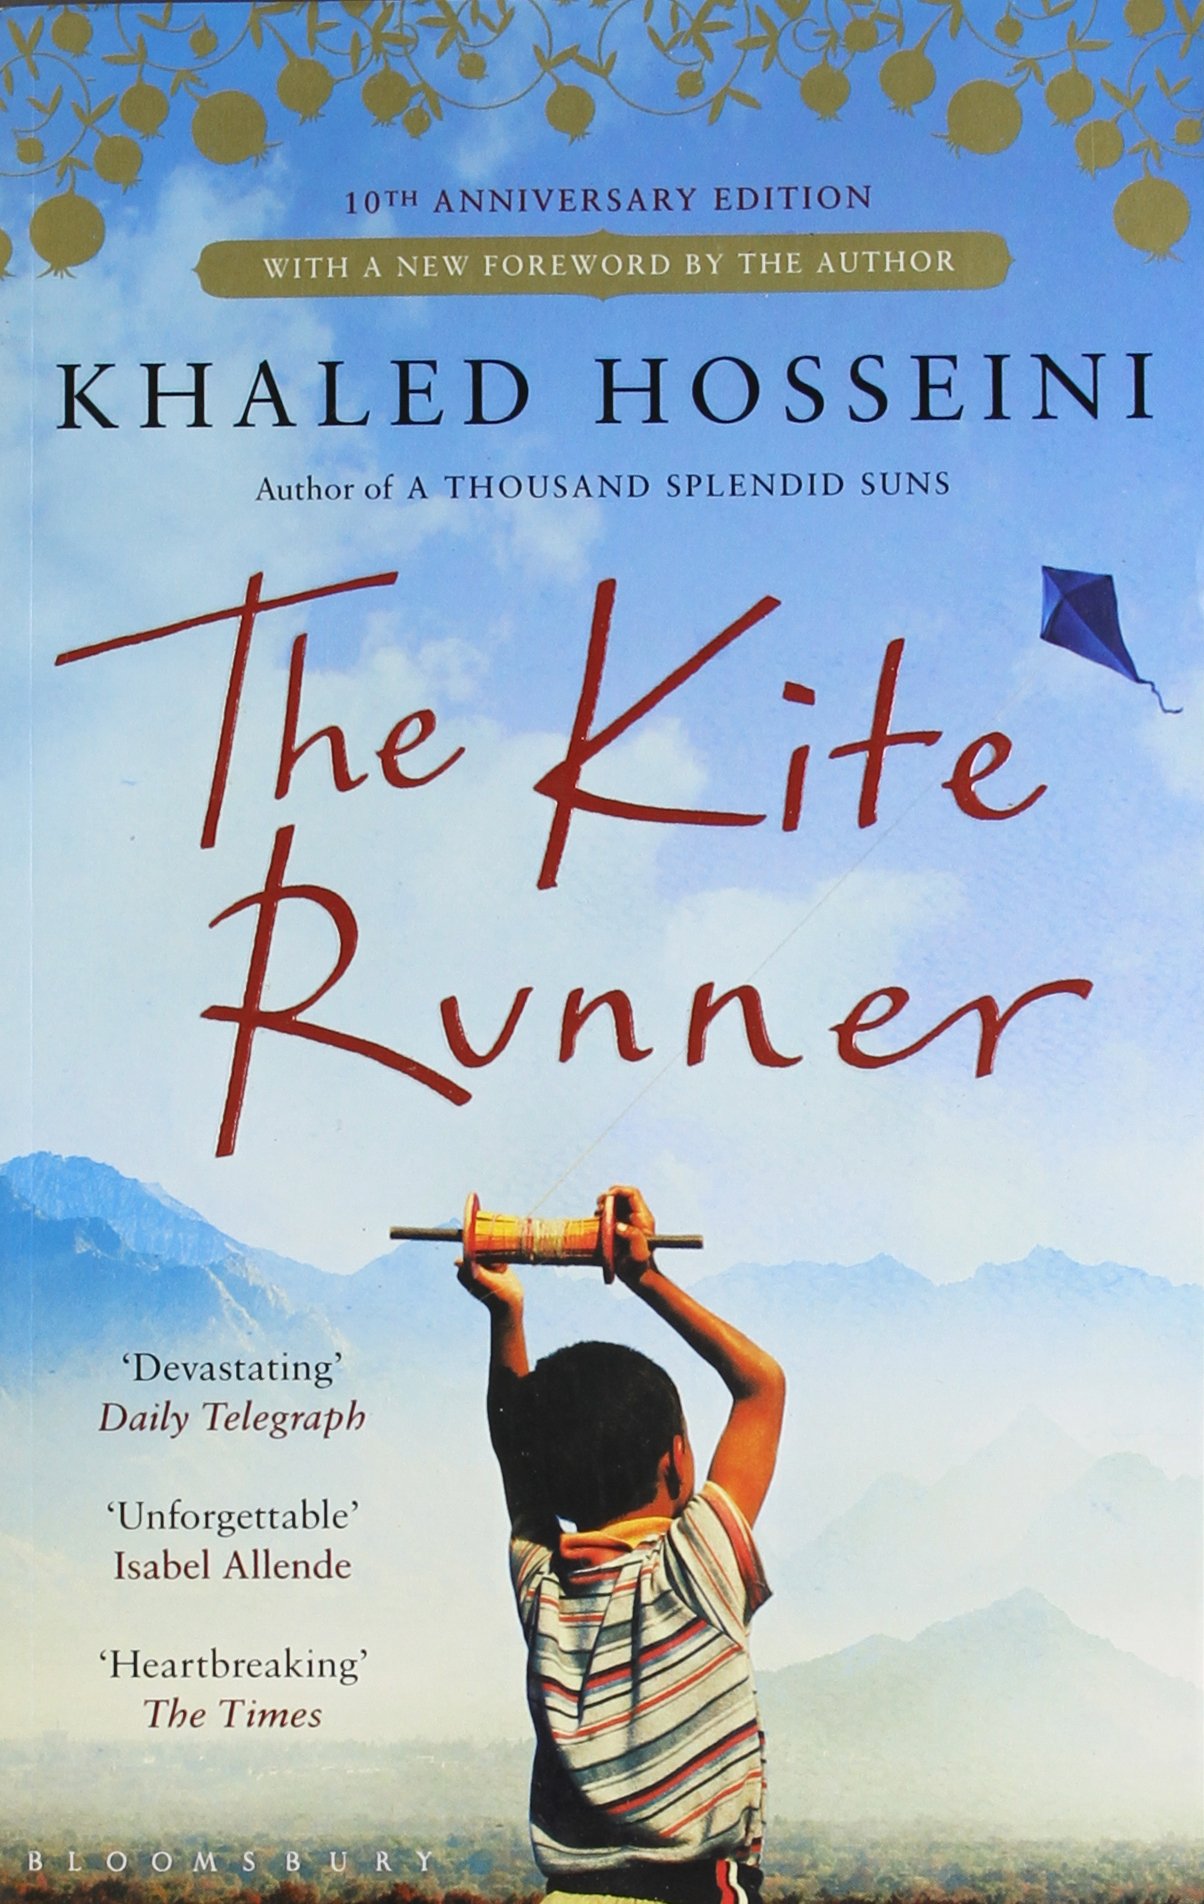 Book Review - The Kite Runner by Khaled Hosseini